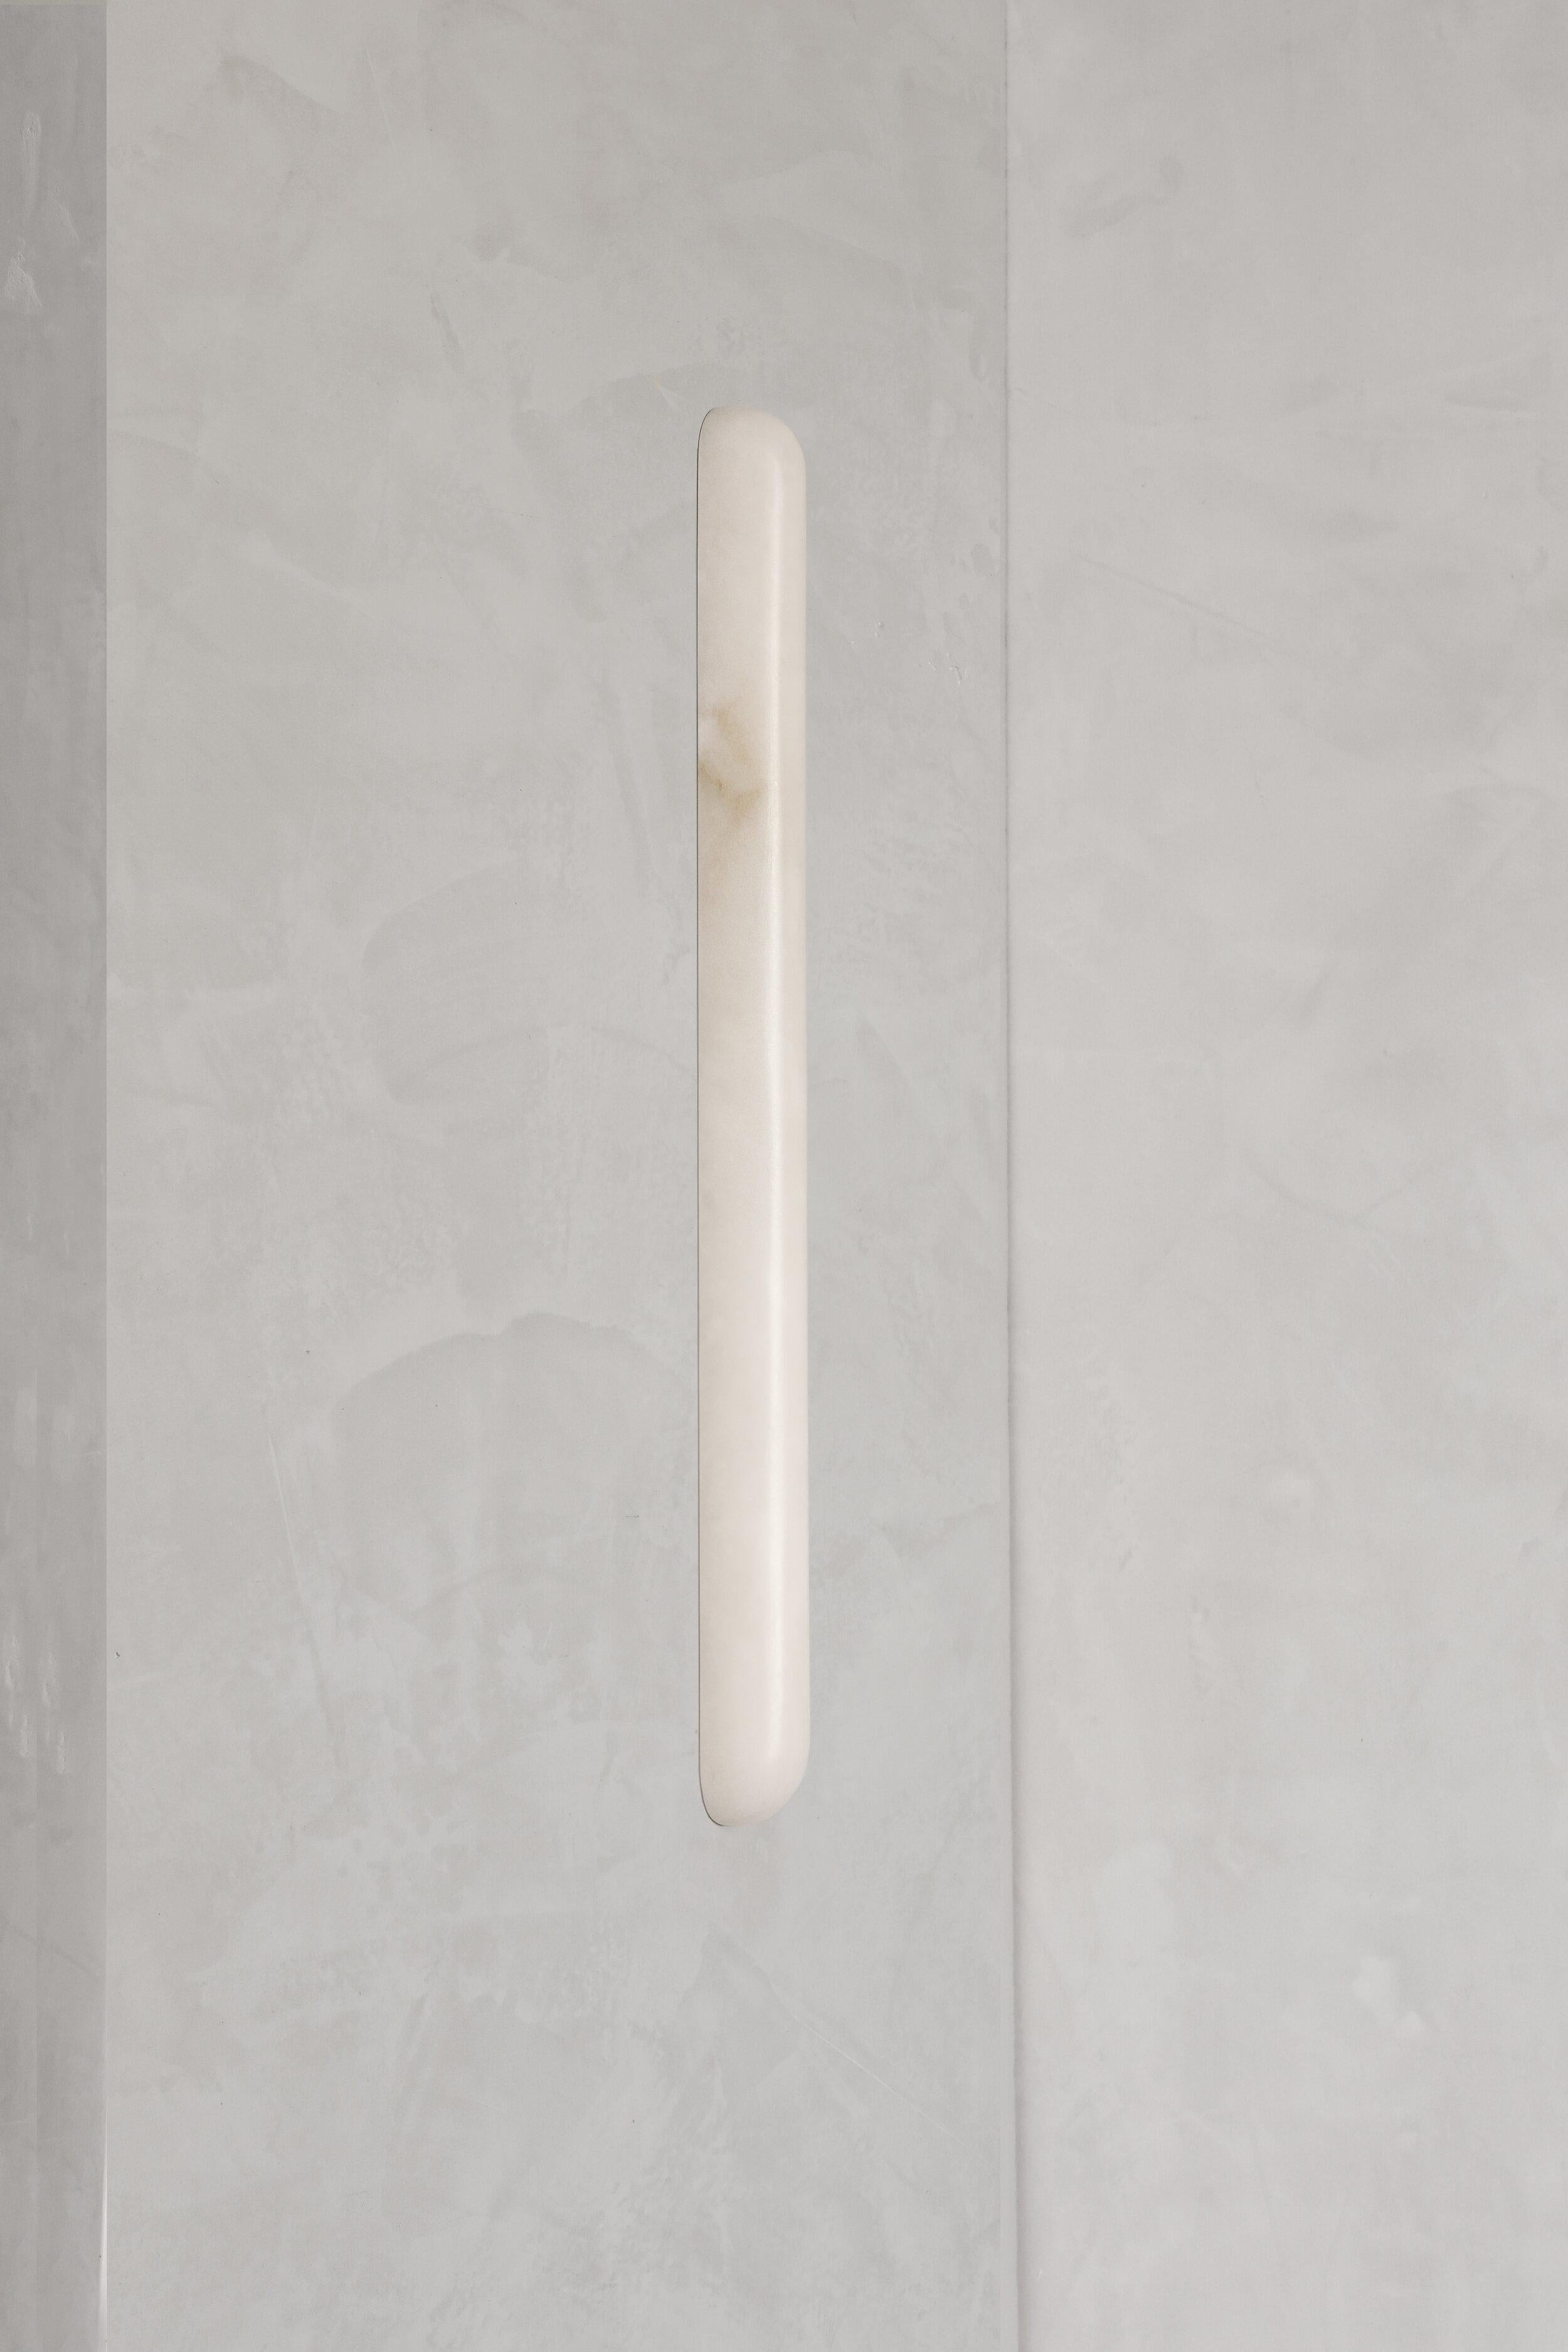 Tub 60 Alabaster wall light by Contain.
Dimensions: D 4 x W 4 x H 60 cm
Materials: Alabaster
Also available in different dimensions.

All our lamps can be wired according to each country. If sold to the USA it will be wired for the USA for